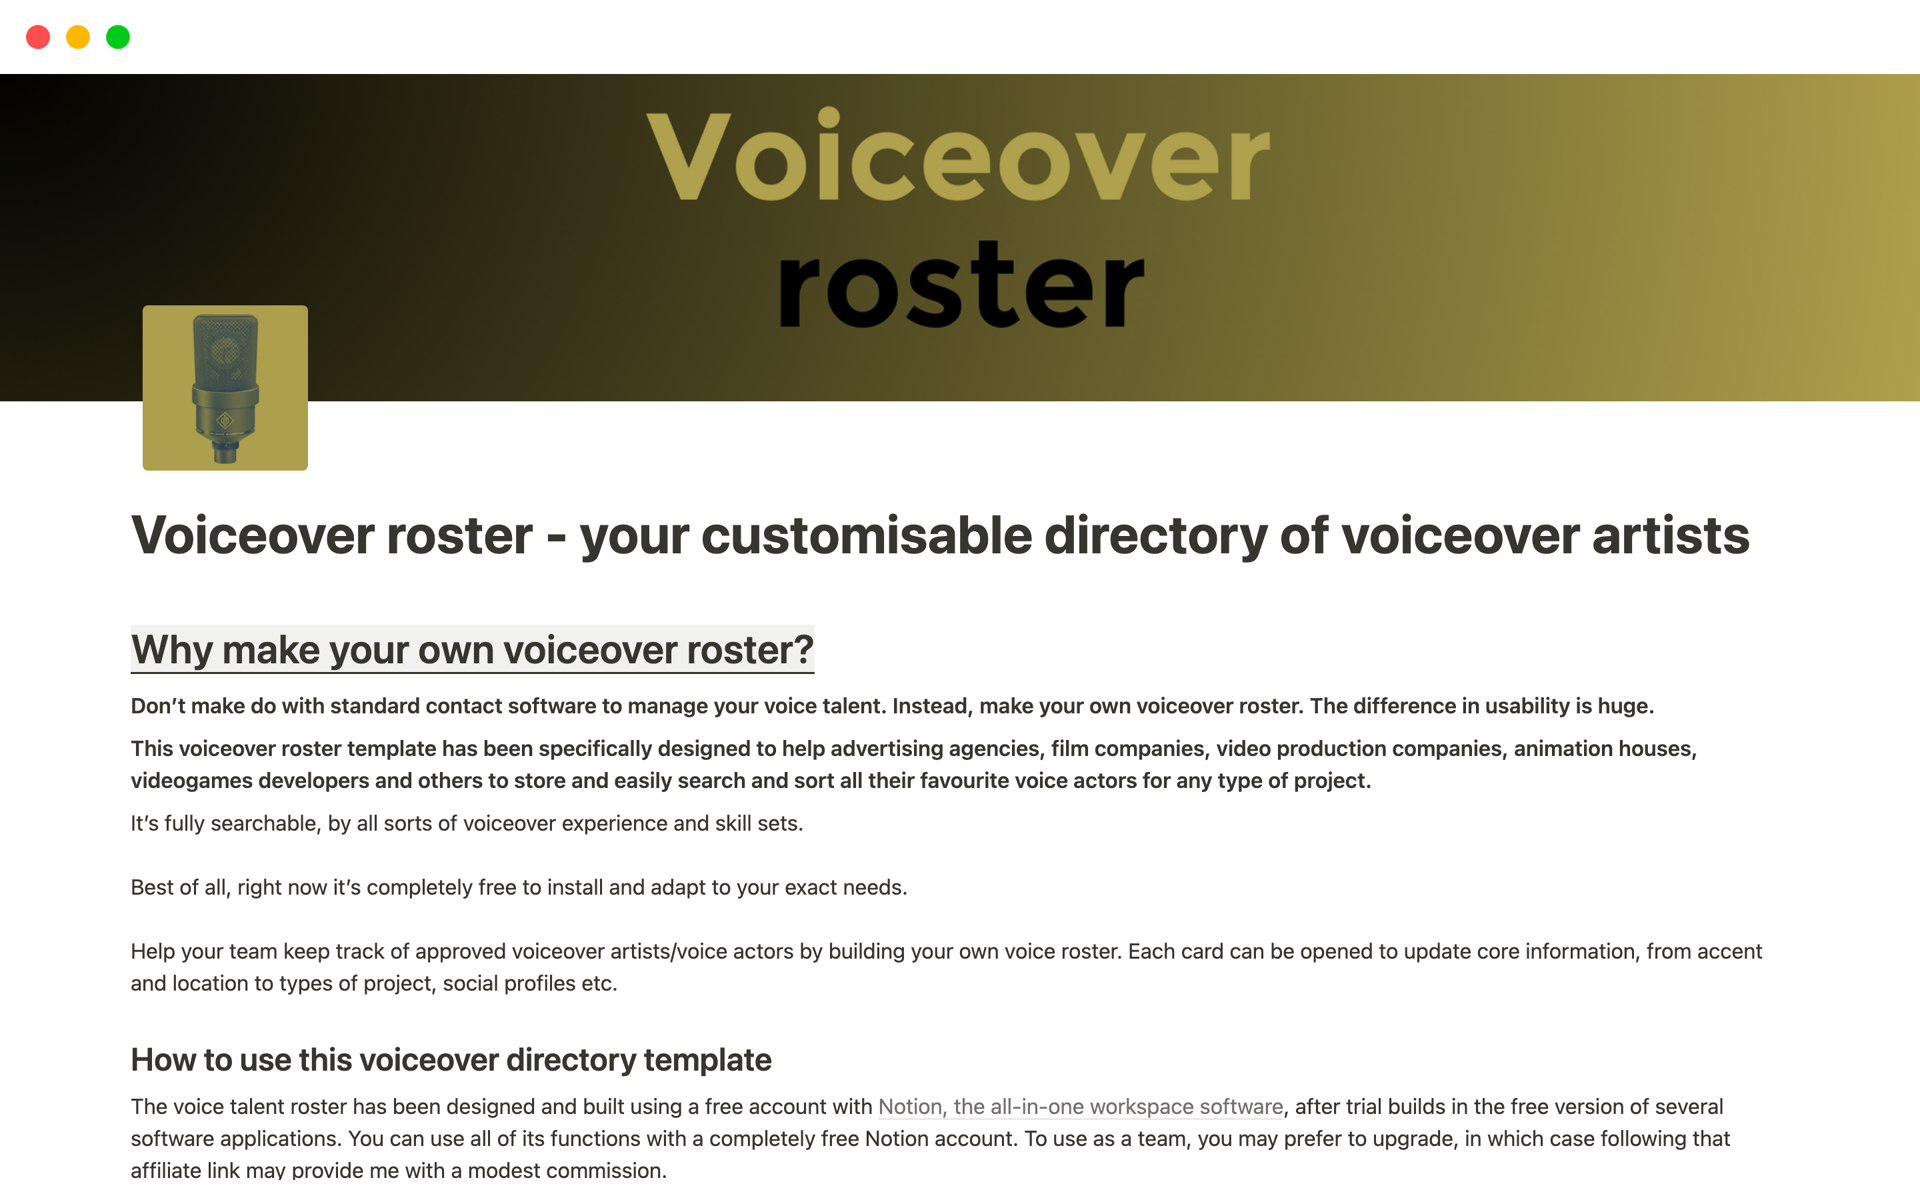 Mallin esikatselu nimelle Voiceover roster - a voice artist directory